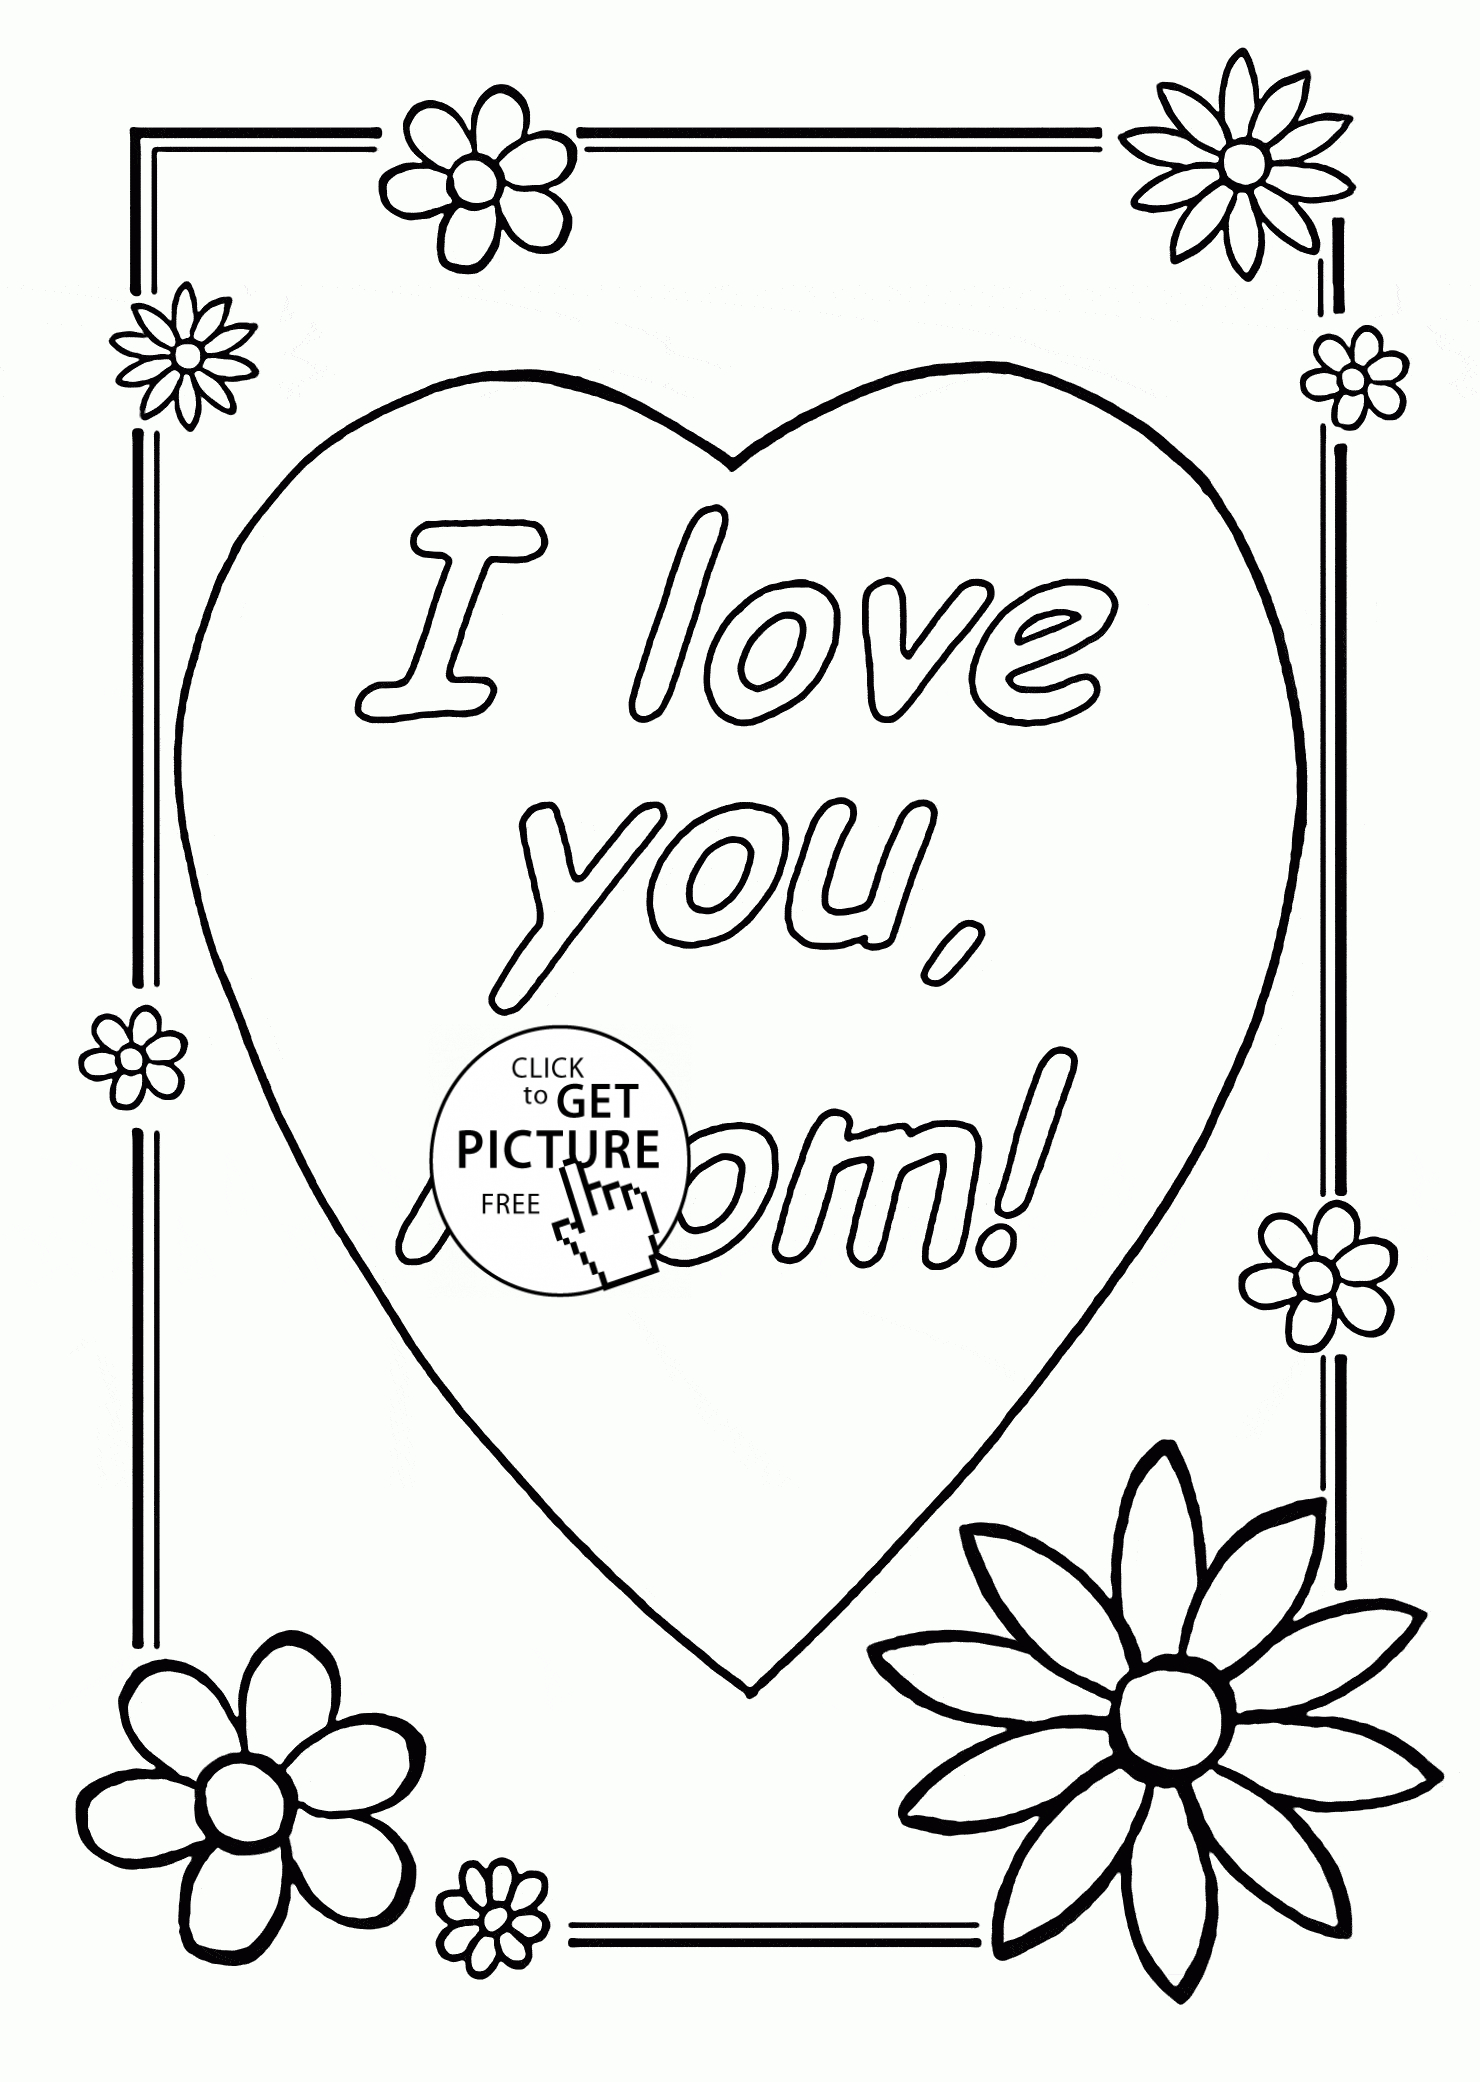 Free Mother's Day Coloring Pages I Love You Mom Mothers Day Coloring Page For Kids Coloring Pages